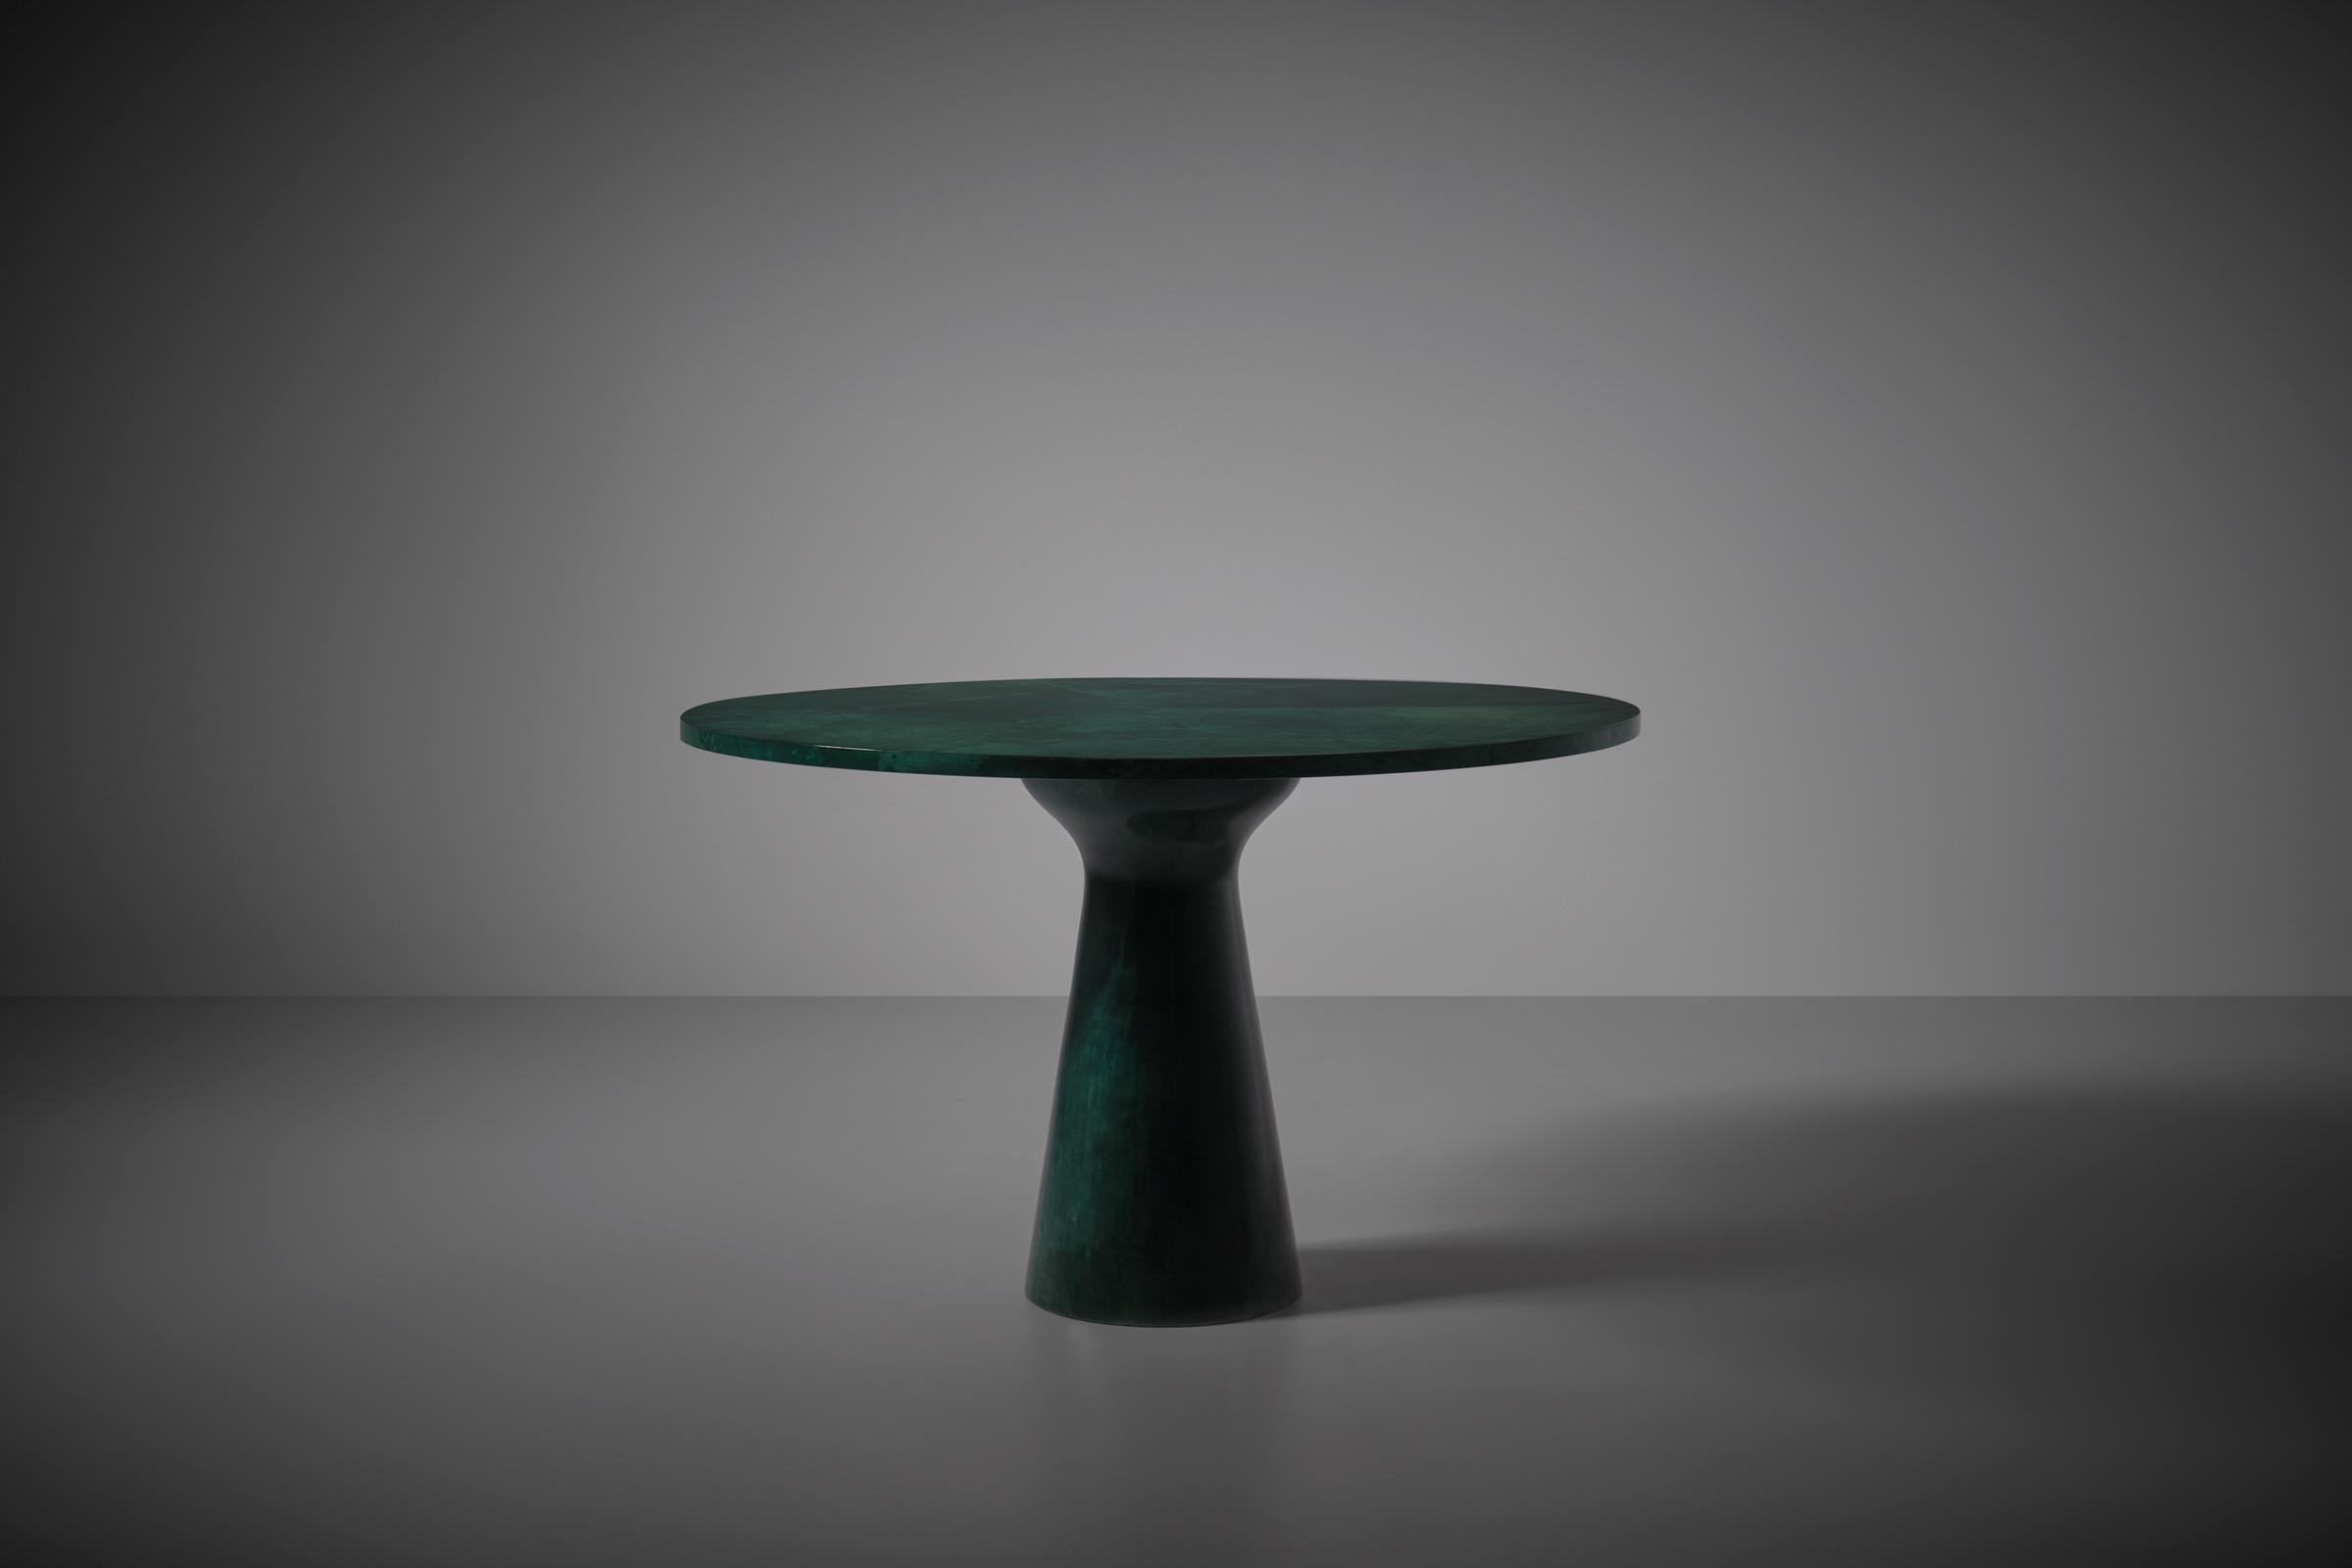 Lacquered Aldo Tura Round Green Pedestal dining table, Italy ca. 1965